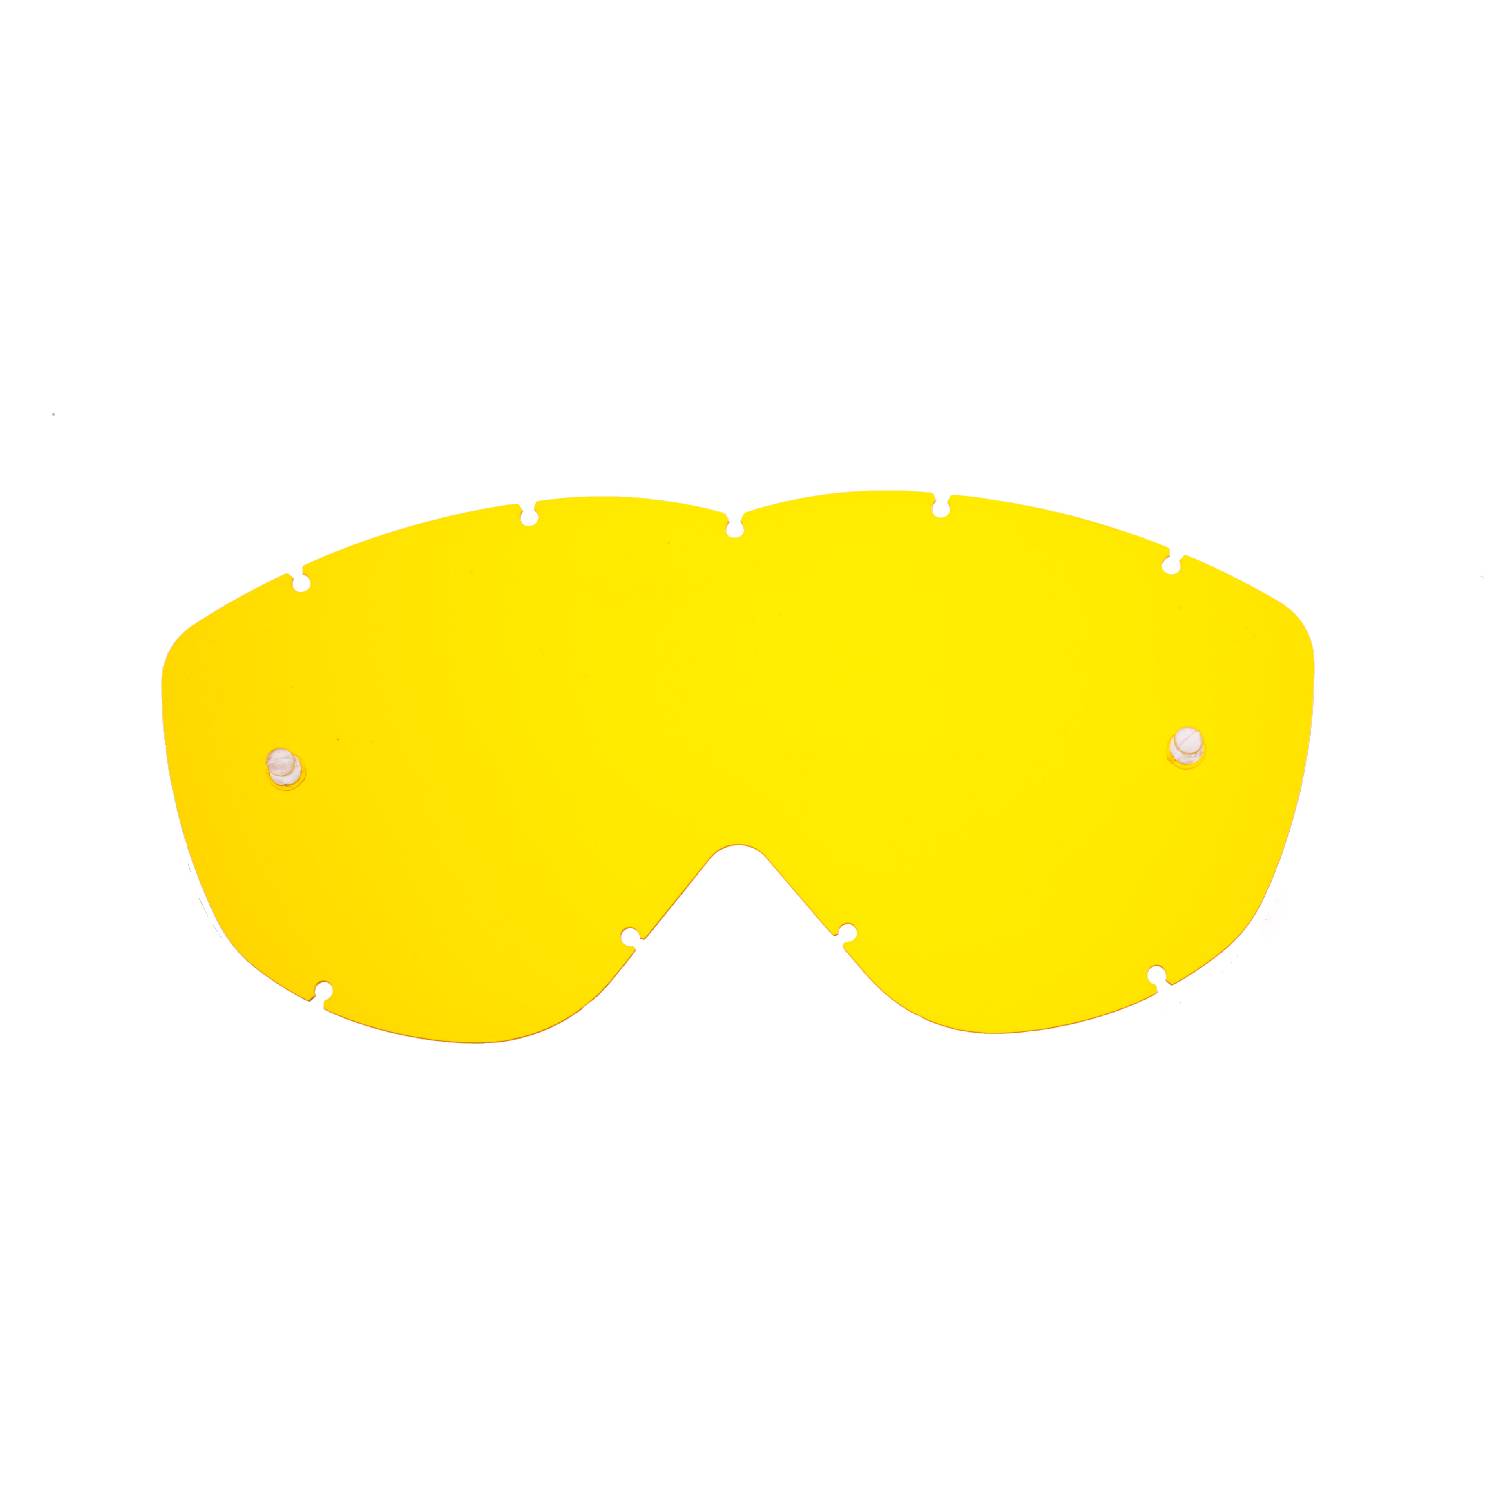 yellow replacement lenses for goggles compatible for Spy Alloy / Targa goggle